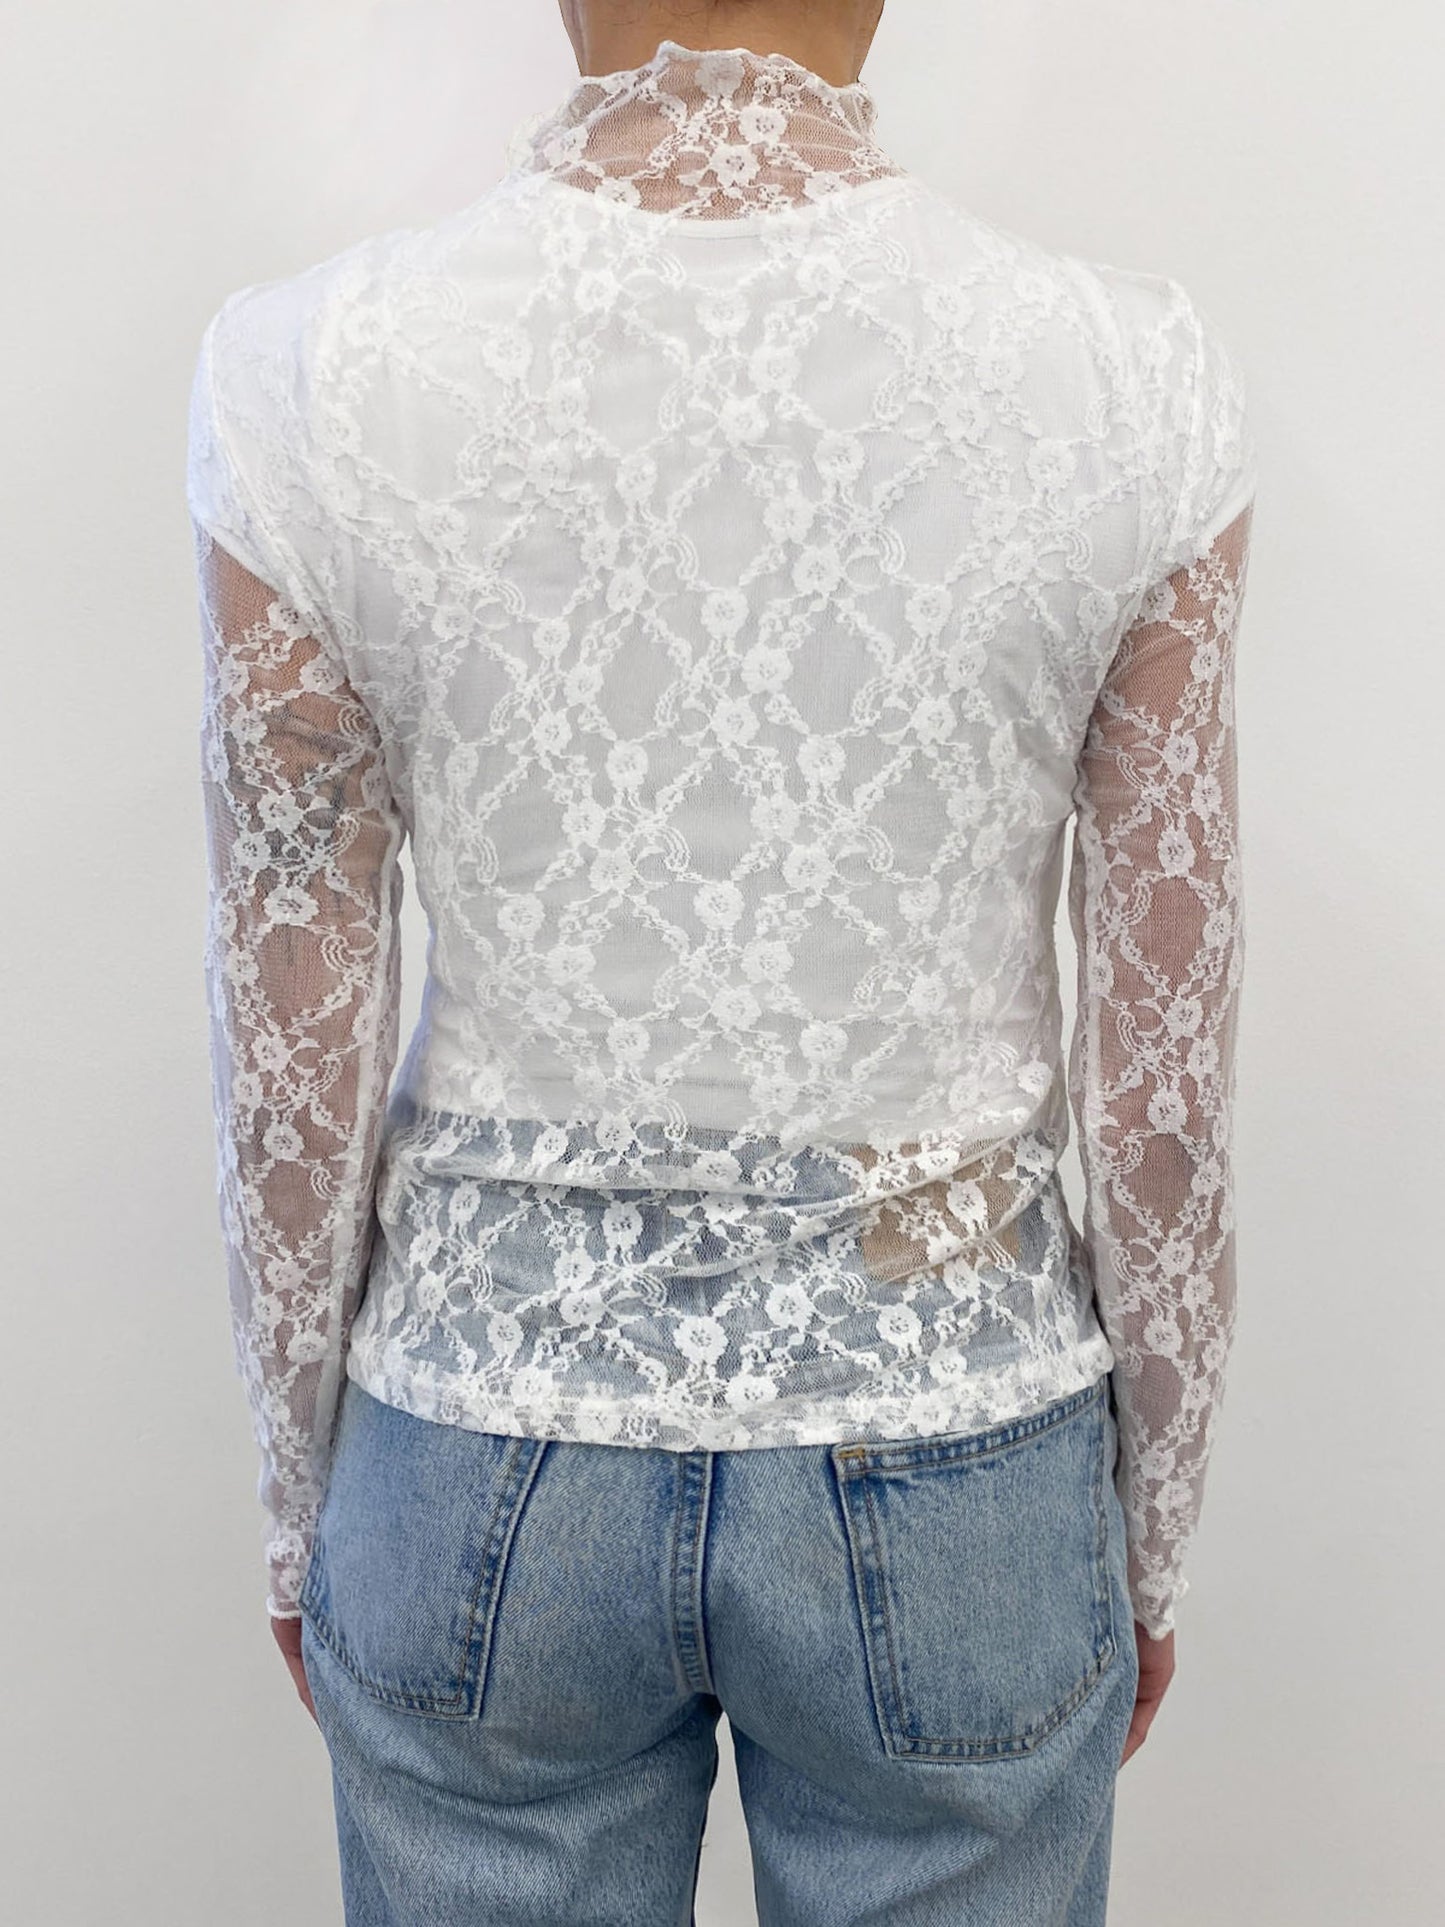 Floral Sheer Lace